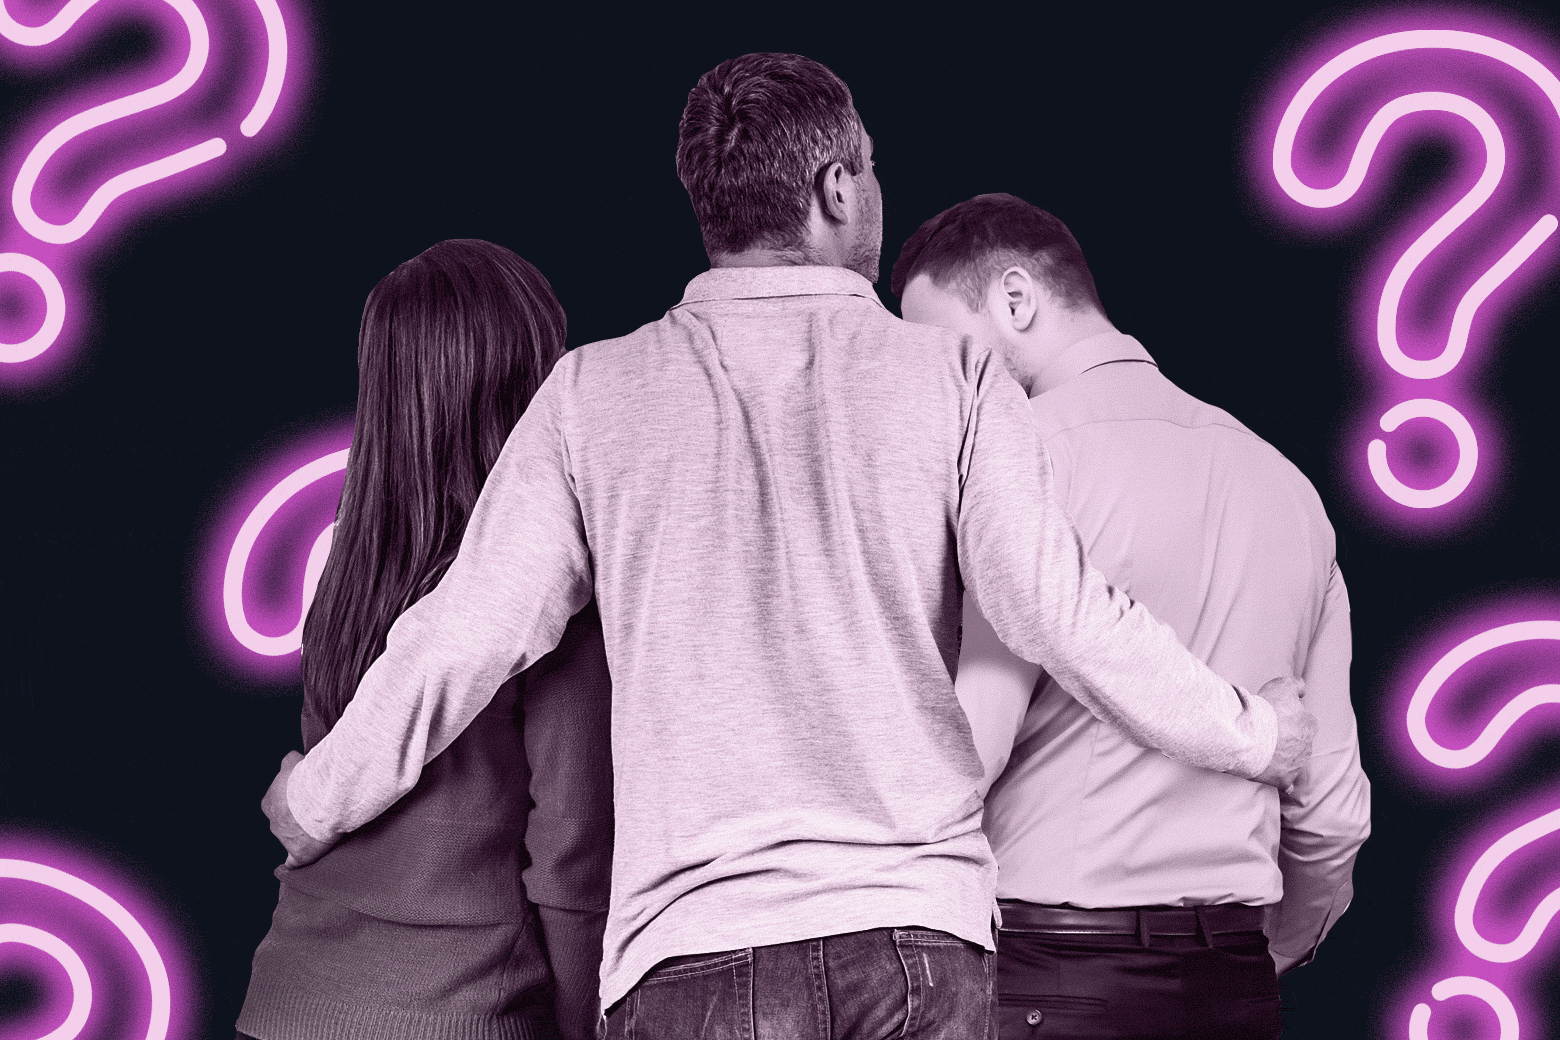 Does liking incest porn mean you really want it? I fear my brother and sister think